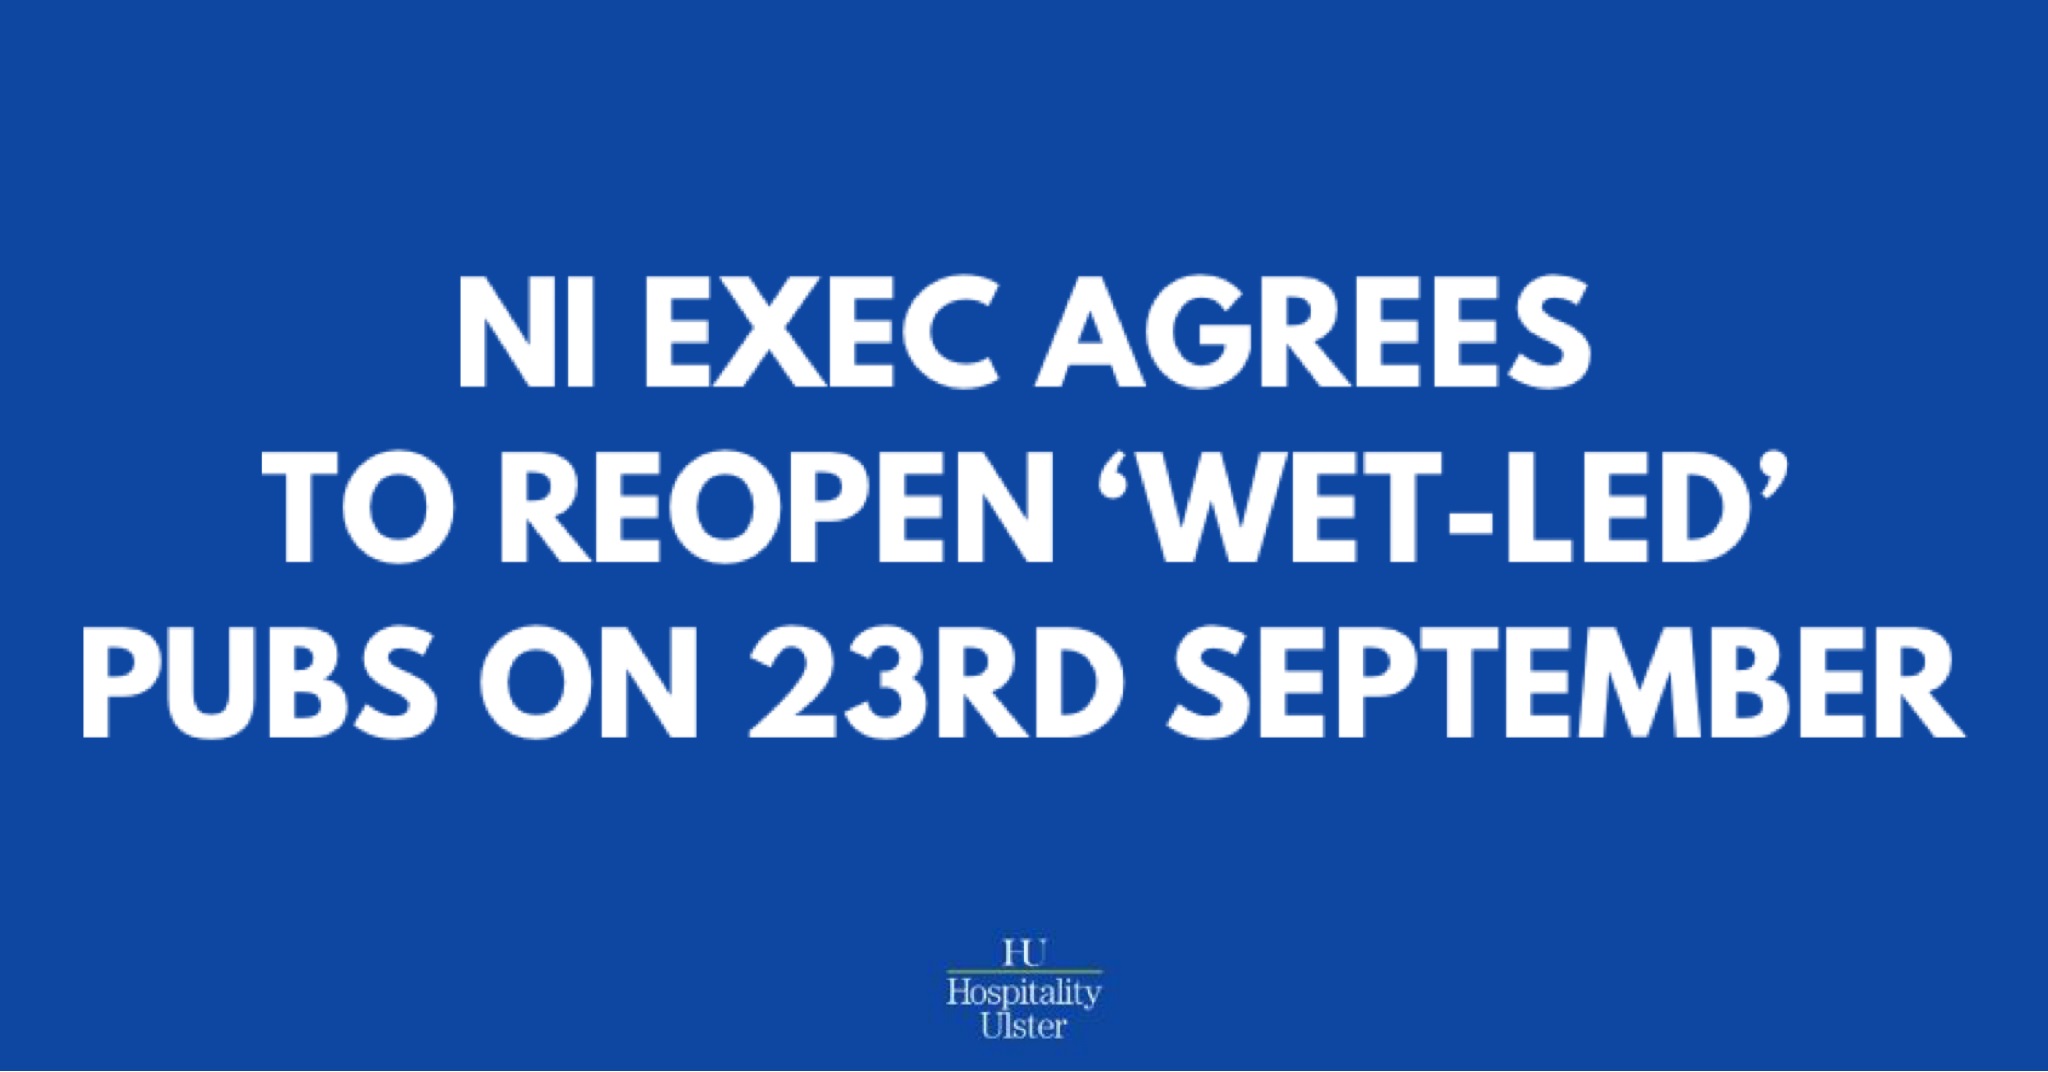 NI EXEC AGREES TO REOPEN WET LED PUBS ON 23RD SEPTEMBER